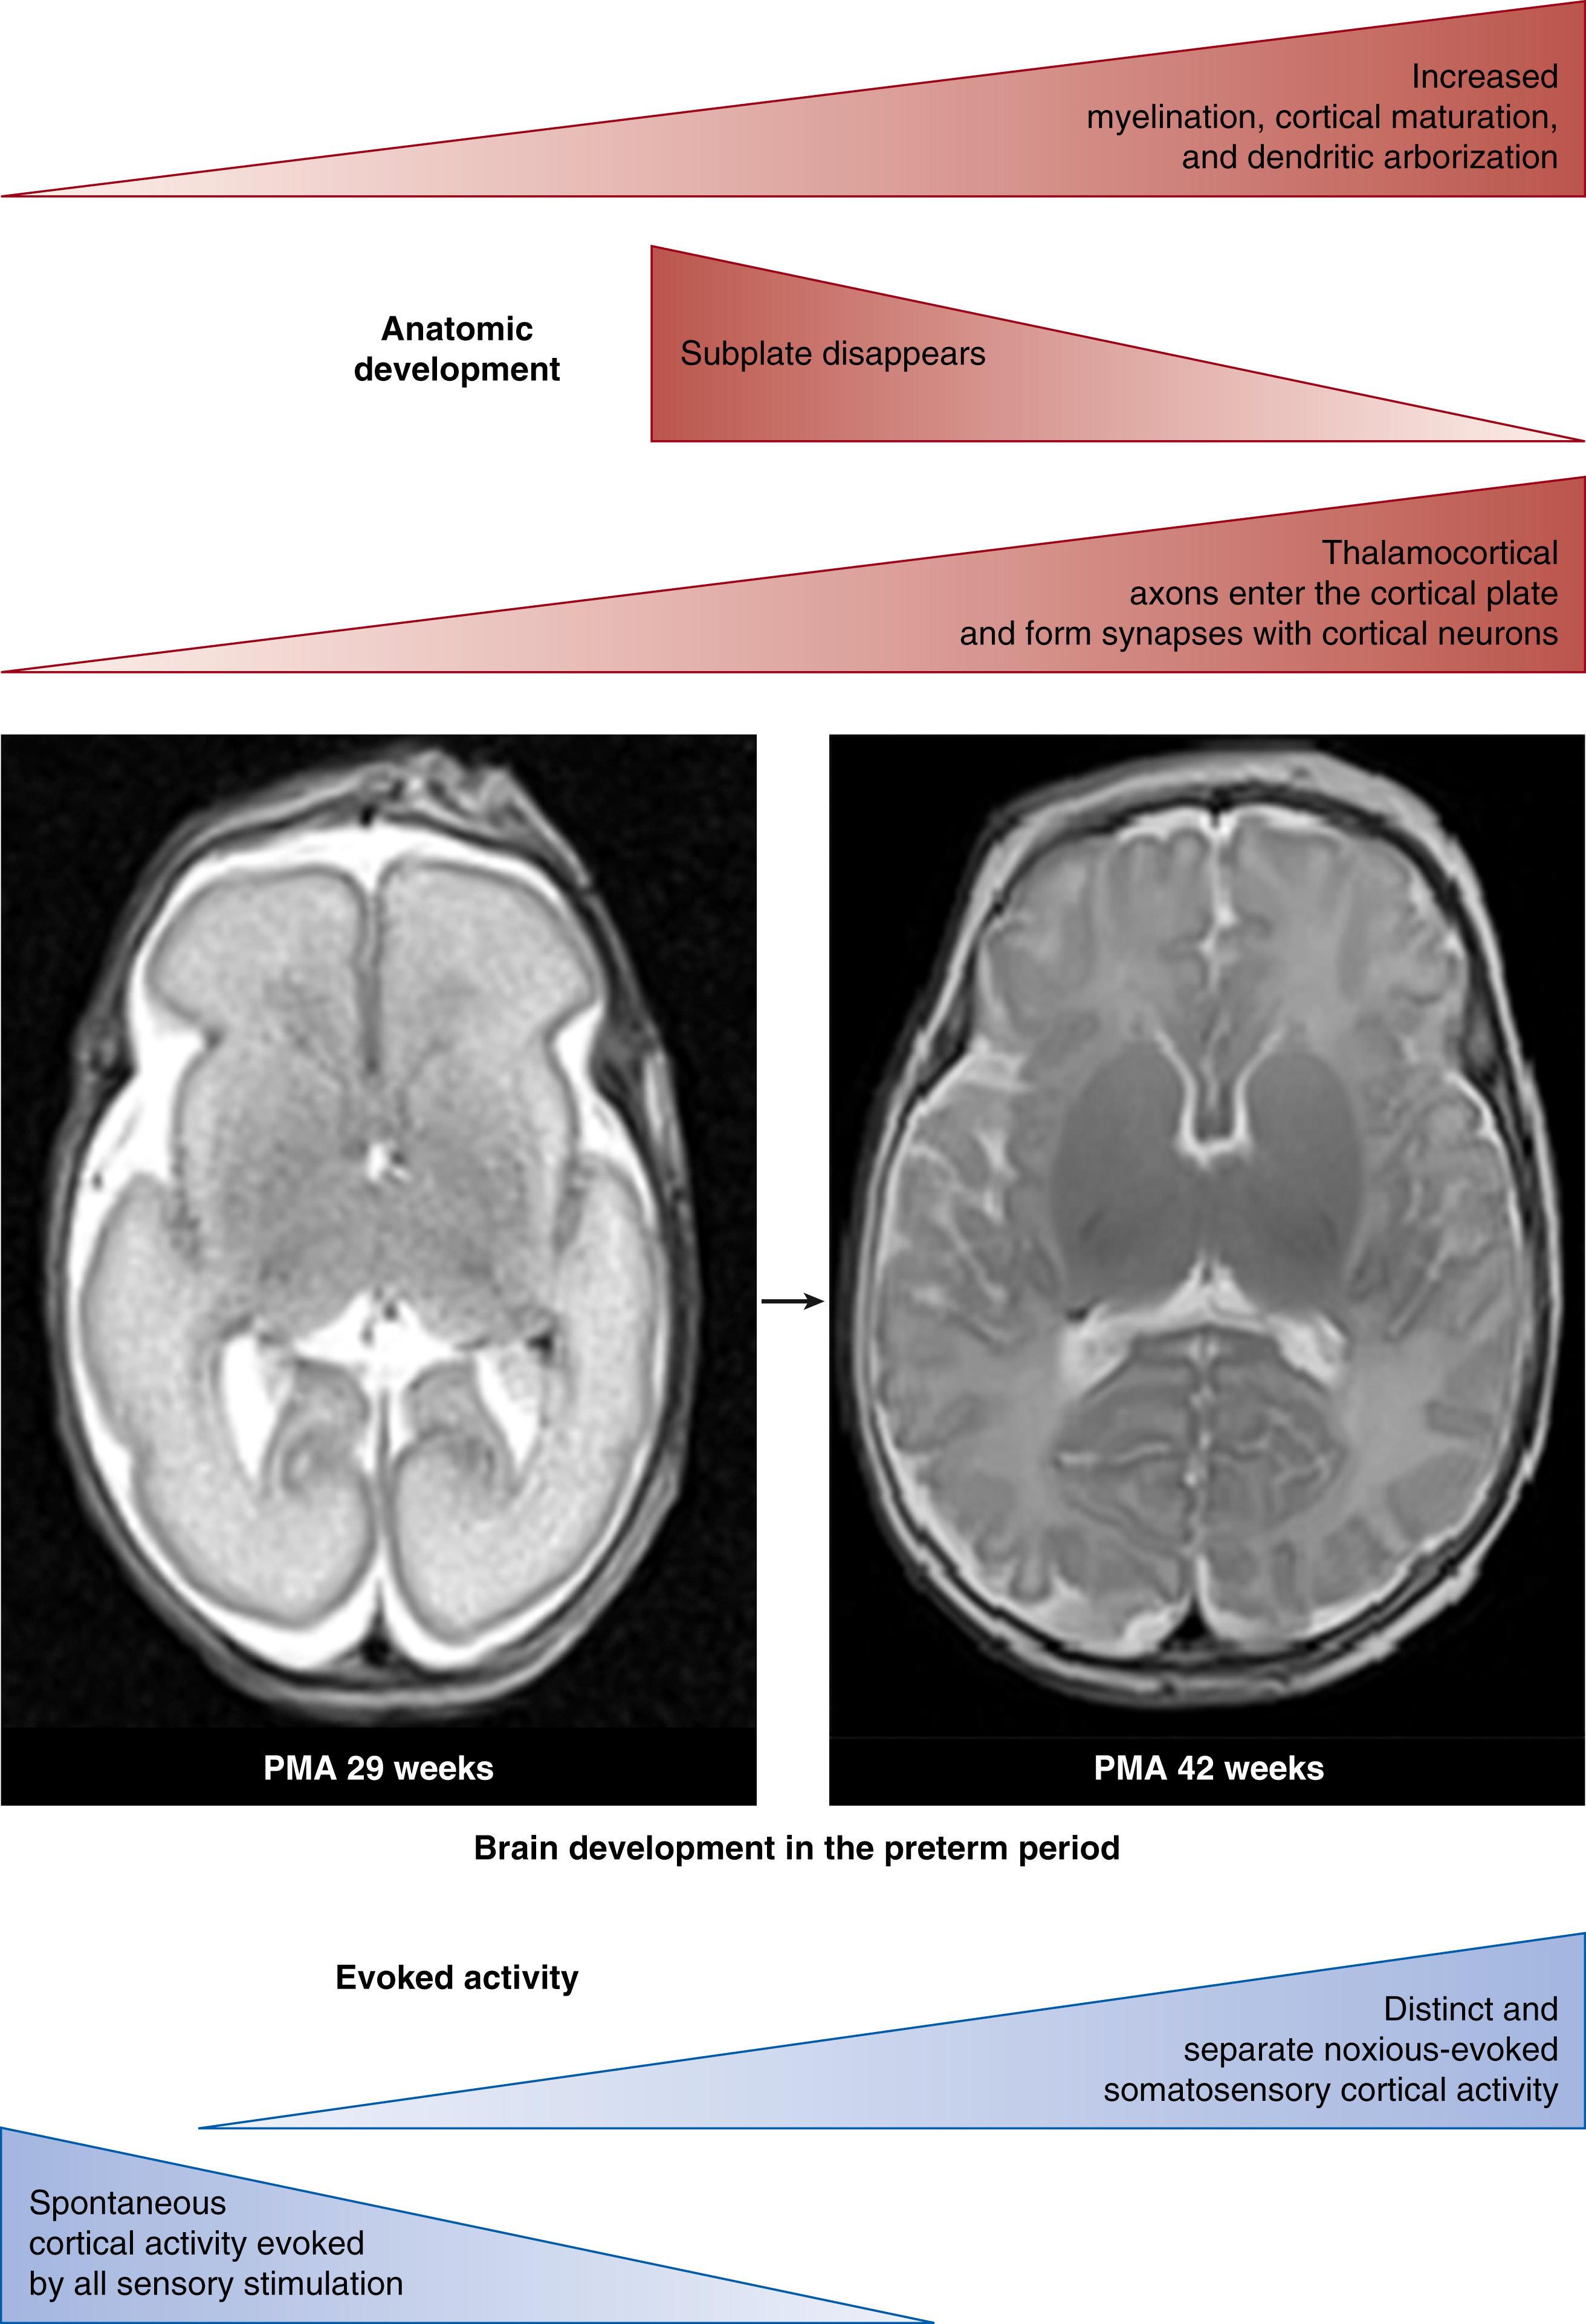 Fig. 128.1, Brain development in the preterm period. Changes in the anatomic development (red) and evoked cortical activity (blue) in the preterm period. Magnetic resonance imaging (MRI) shows the development of the brain from the preterm period (29 weeks; left ) to term (42 weeks; right ). See text for full details. PMA, Postmenstrual age.